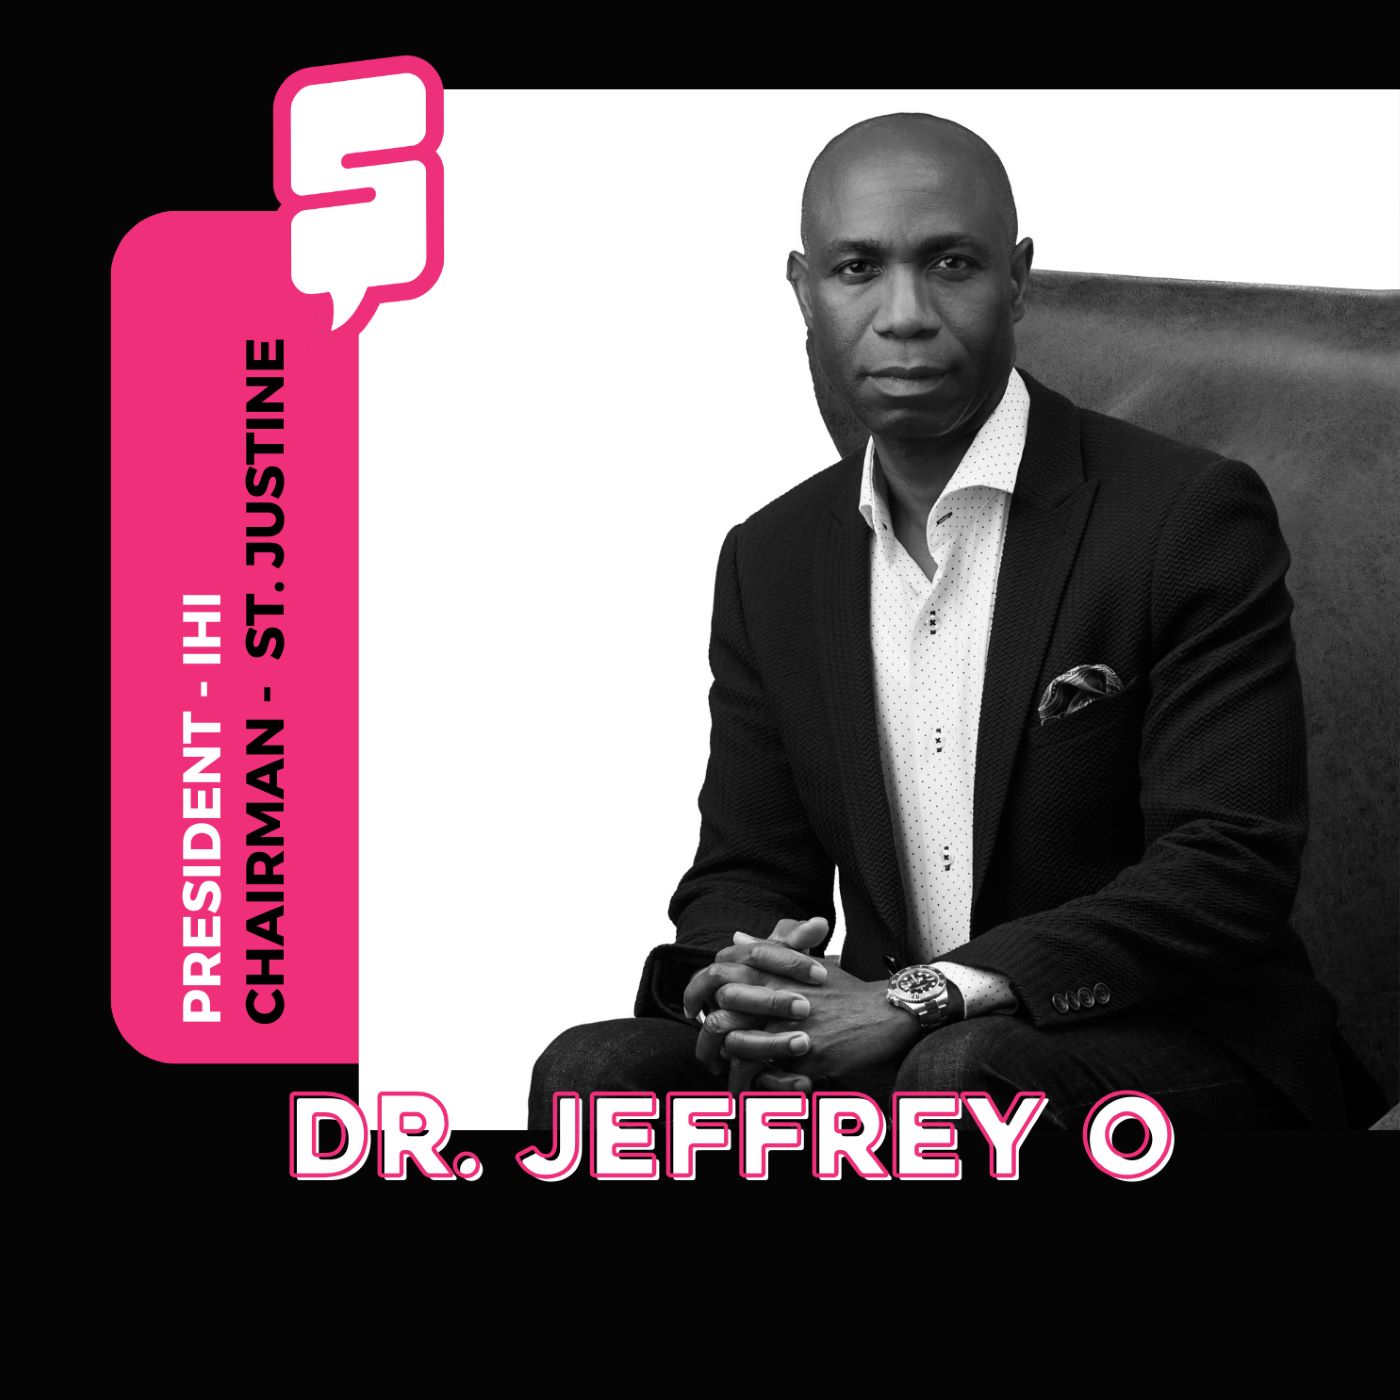 Dr. Jeffrey O – St. Justine & IHI | From humble beginnings to hospitality powerhouse